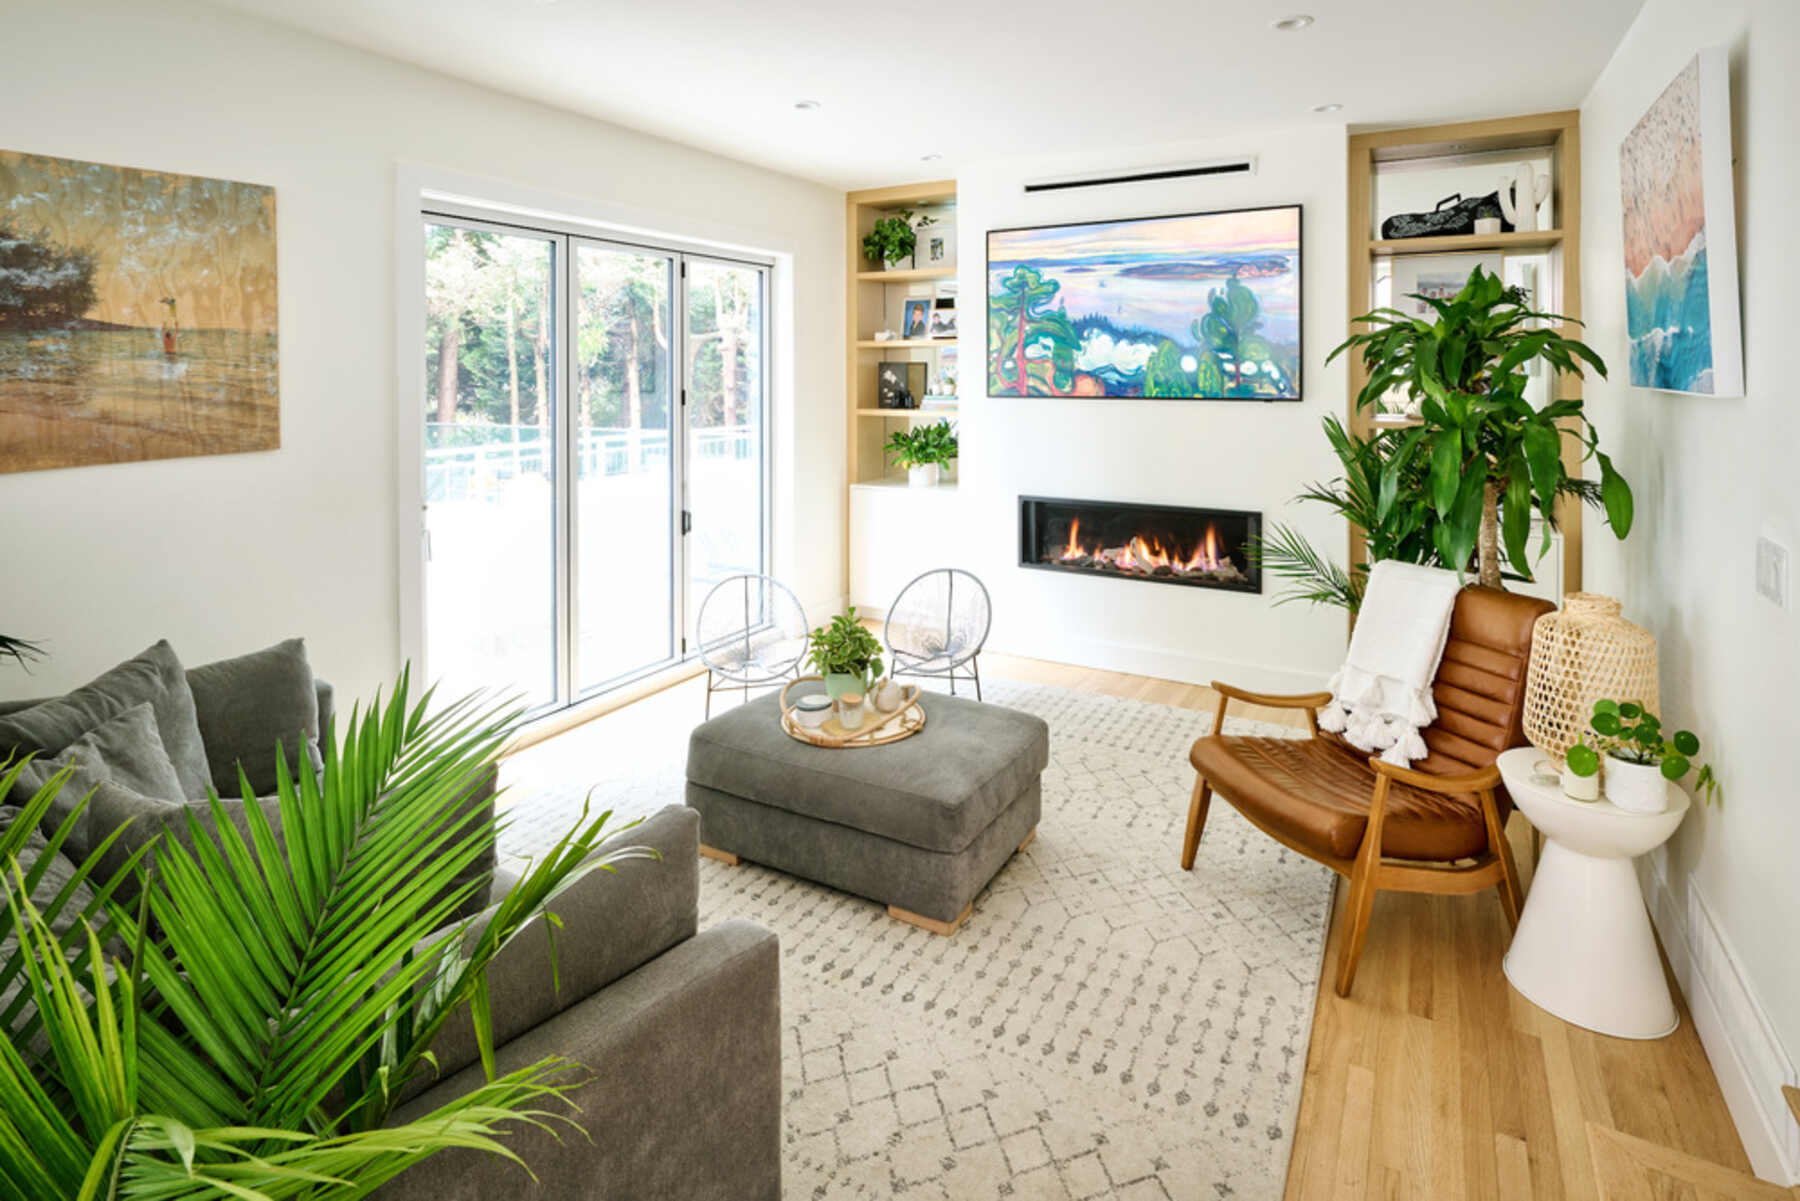 A cozy living room with a fireplace, a comfortable couch, and vibrant plants adding a touch of nature